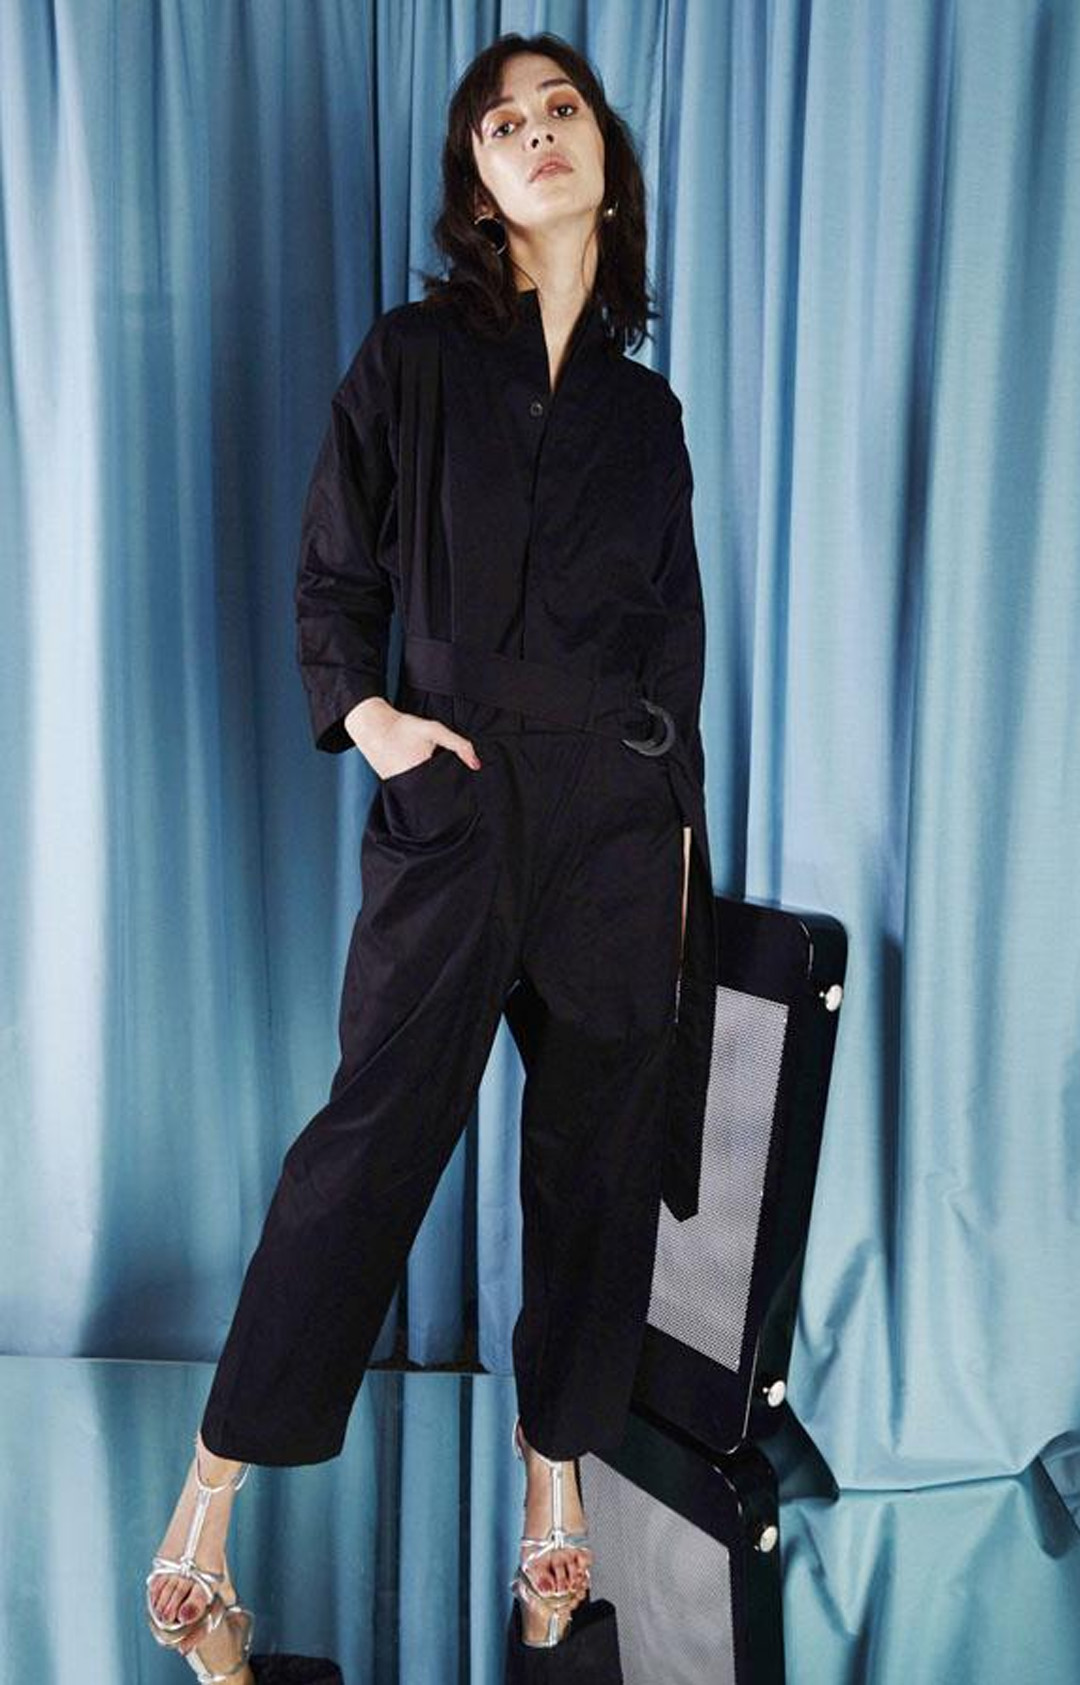 Boilersuit, $490 from Miss Crabb